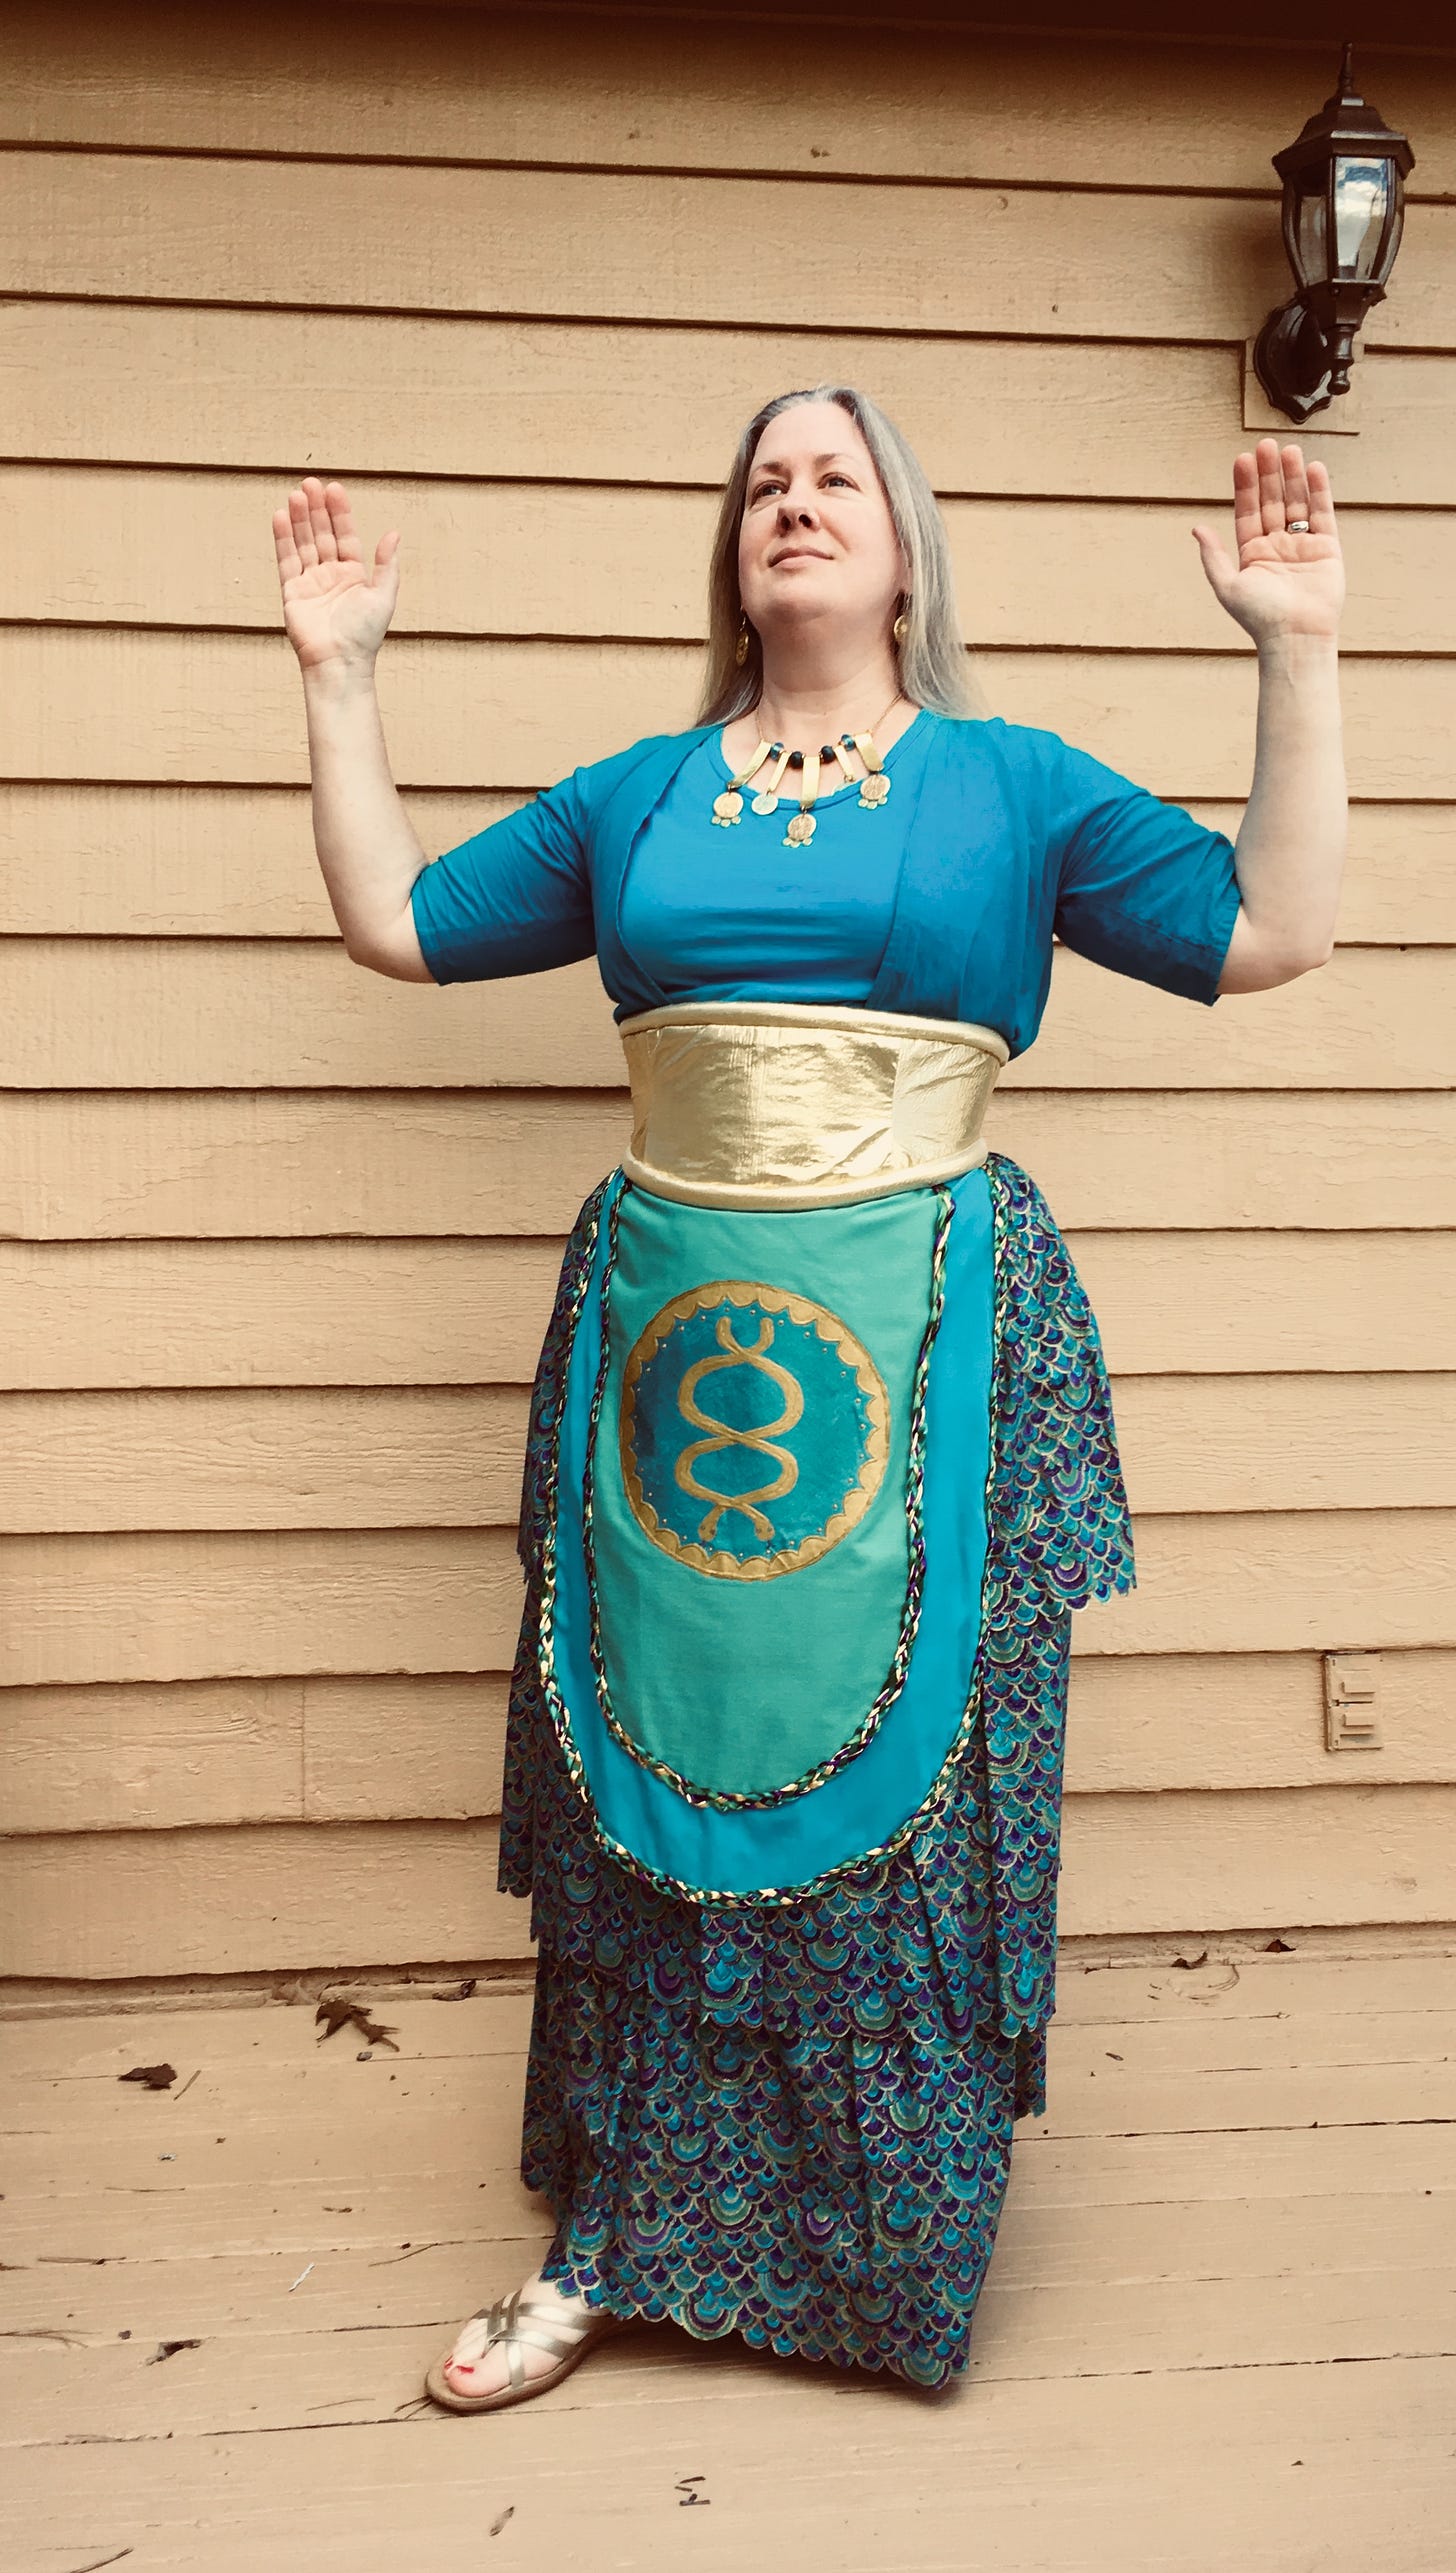 Me, a light-skinned, gray/blond-haired female-presenting person, wearing a Minoan outfit in shades of blue and gold, including a tightly fitted top, a wide belt, an apron, and a tiered skirt.